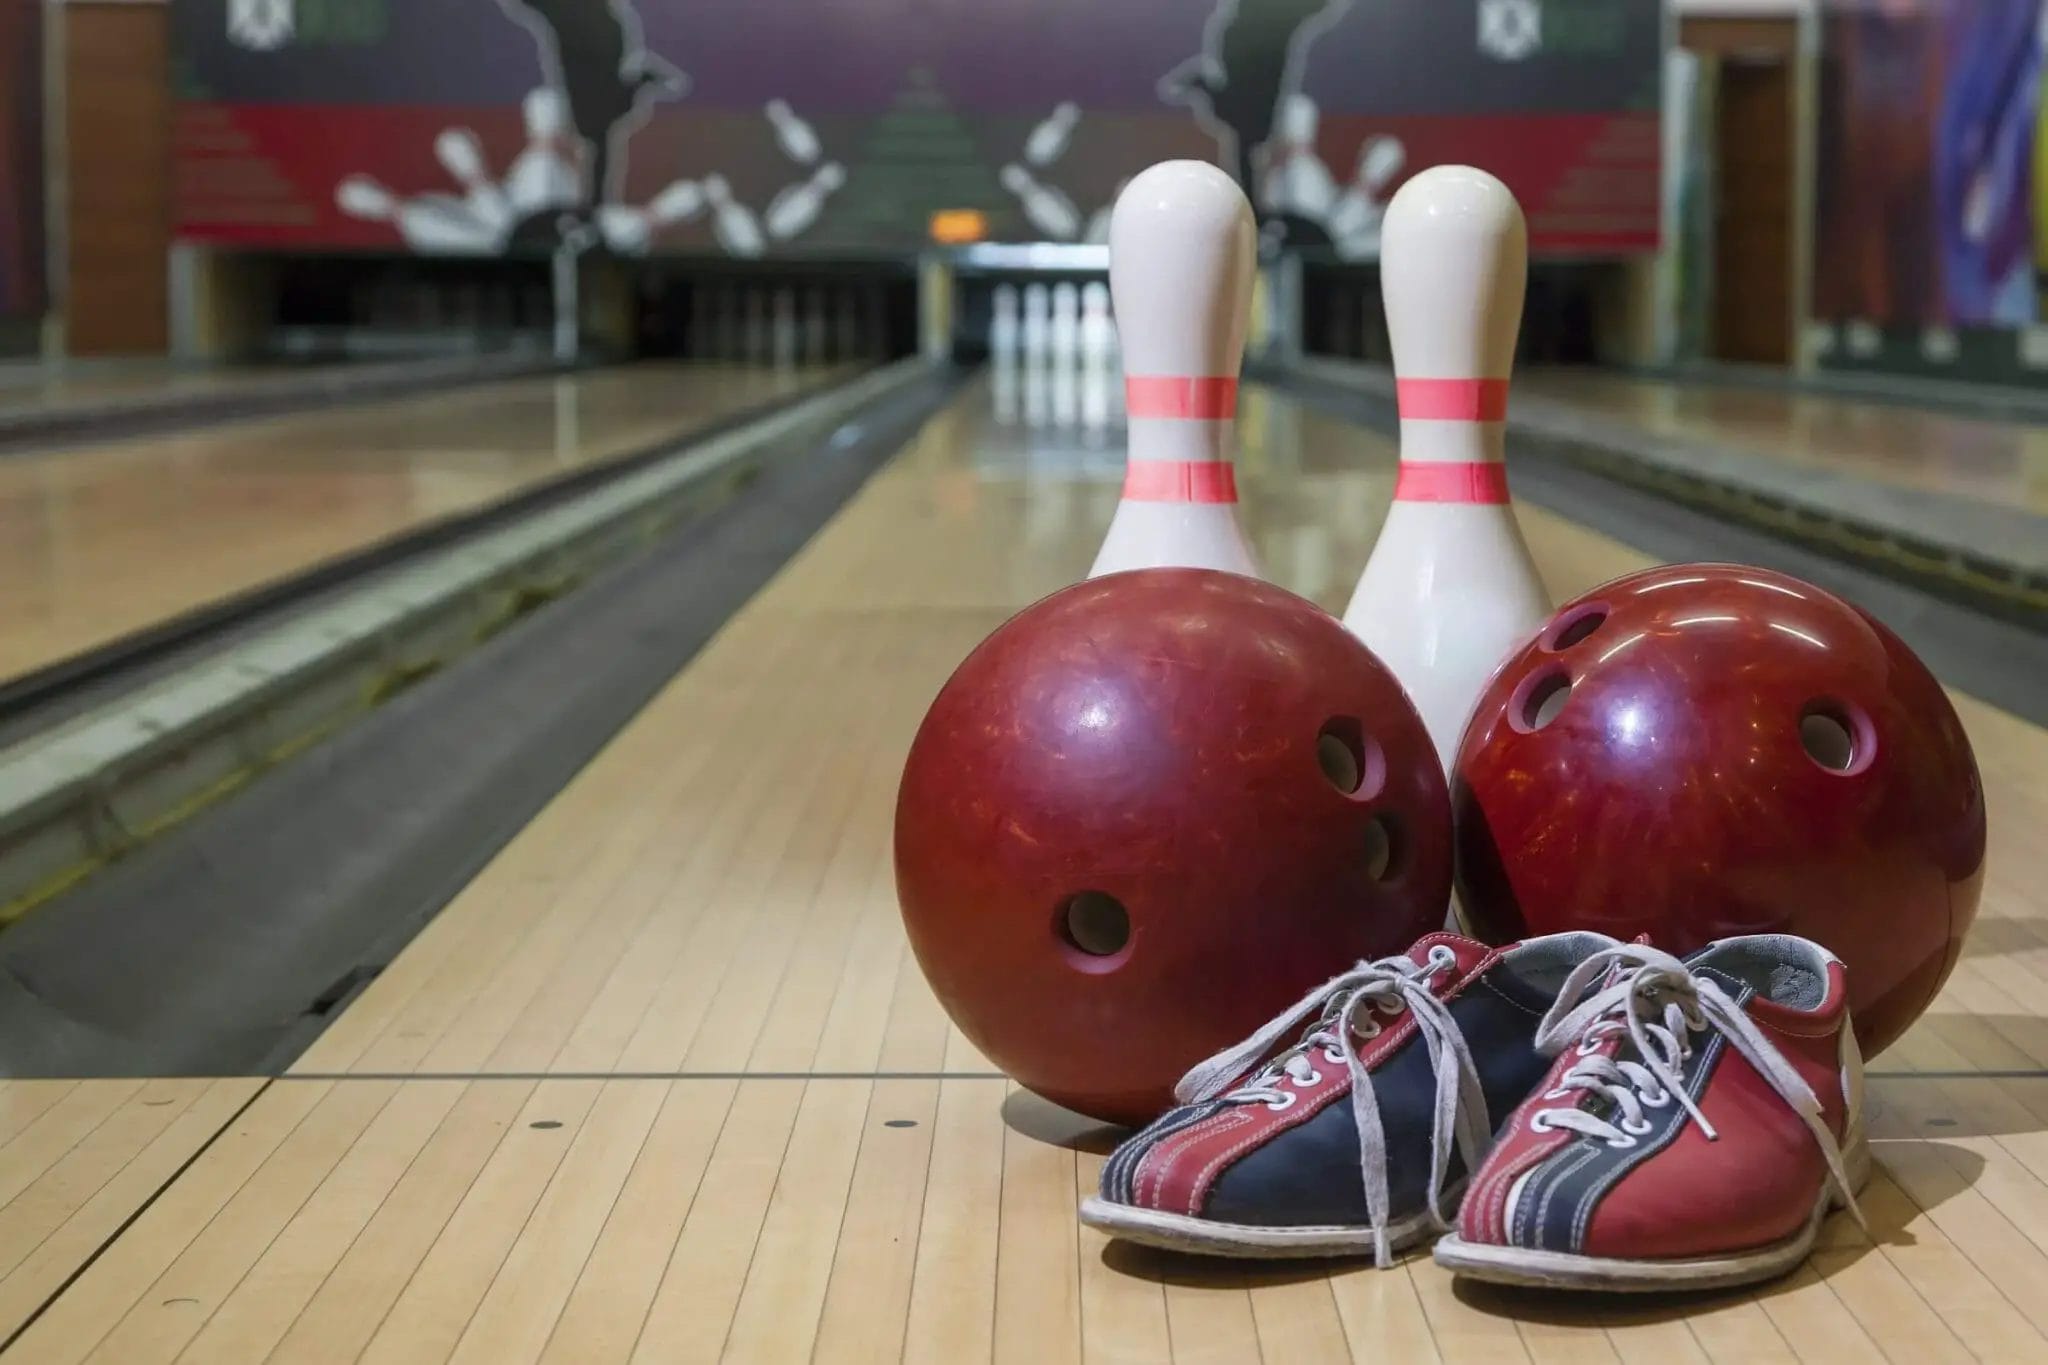 Detail of two bowling pins, two bowling balls, and one pair of bowling shoes on a lane